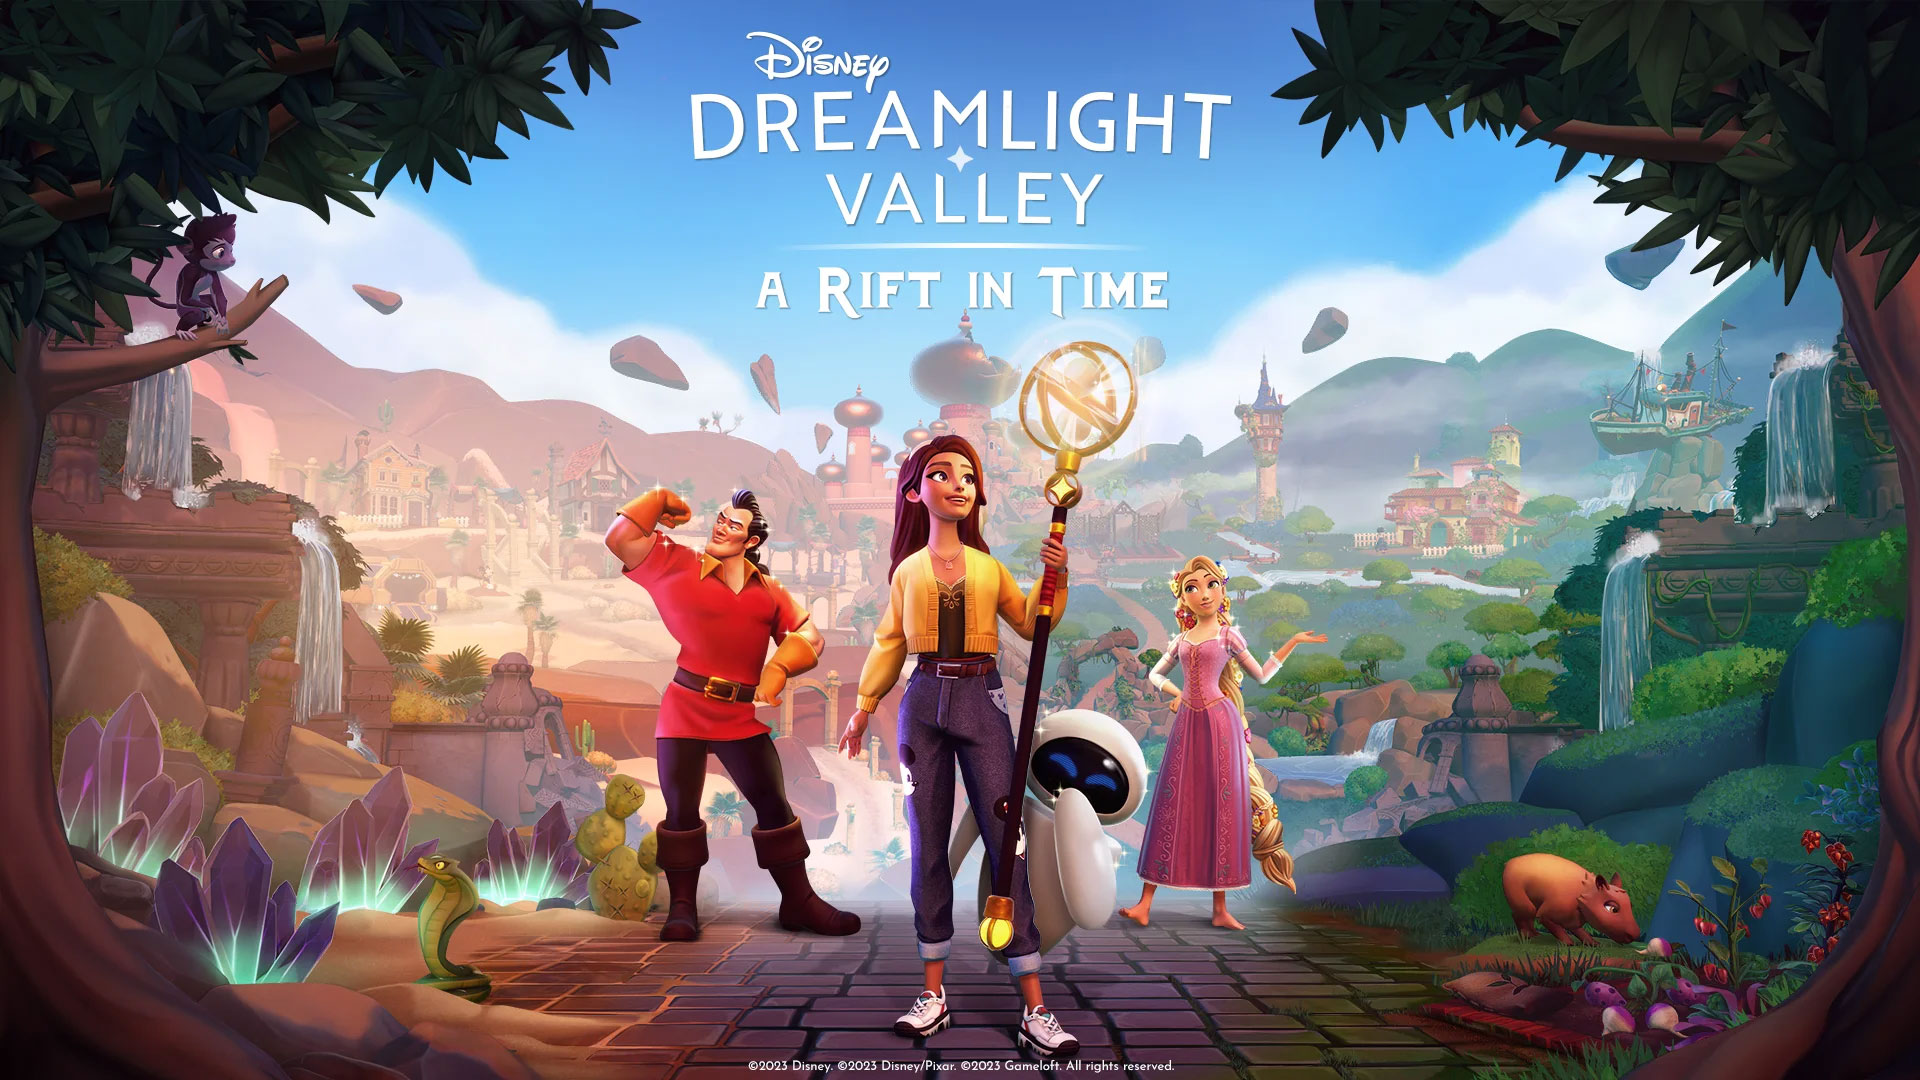 Disney Dreamlight Valley has announced a paid expansion pass: A Rift in Time